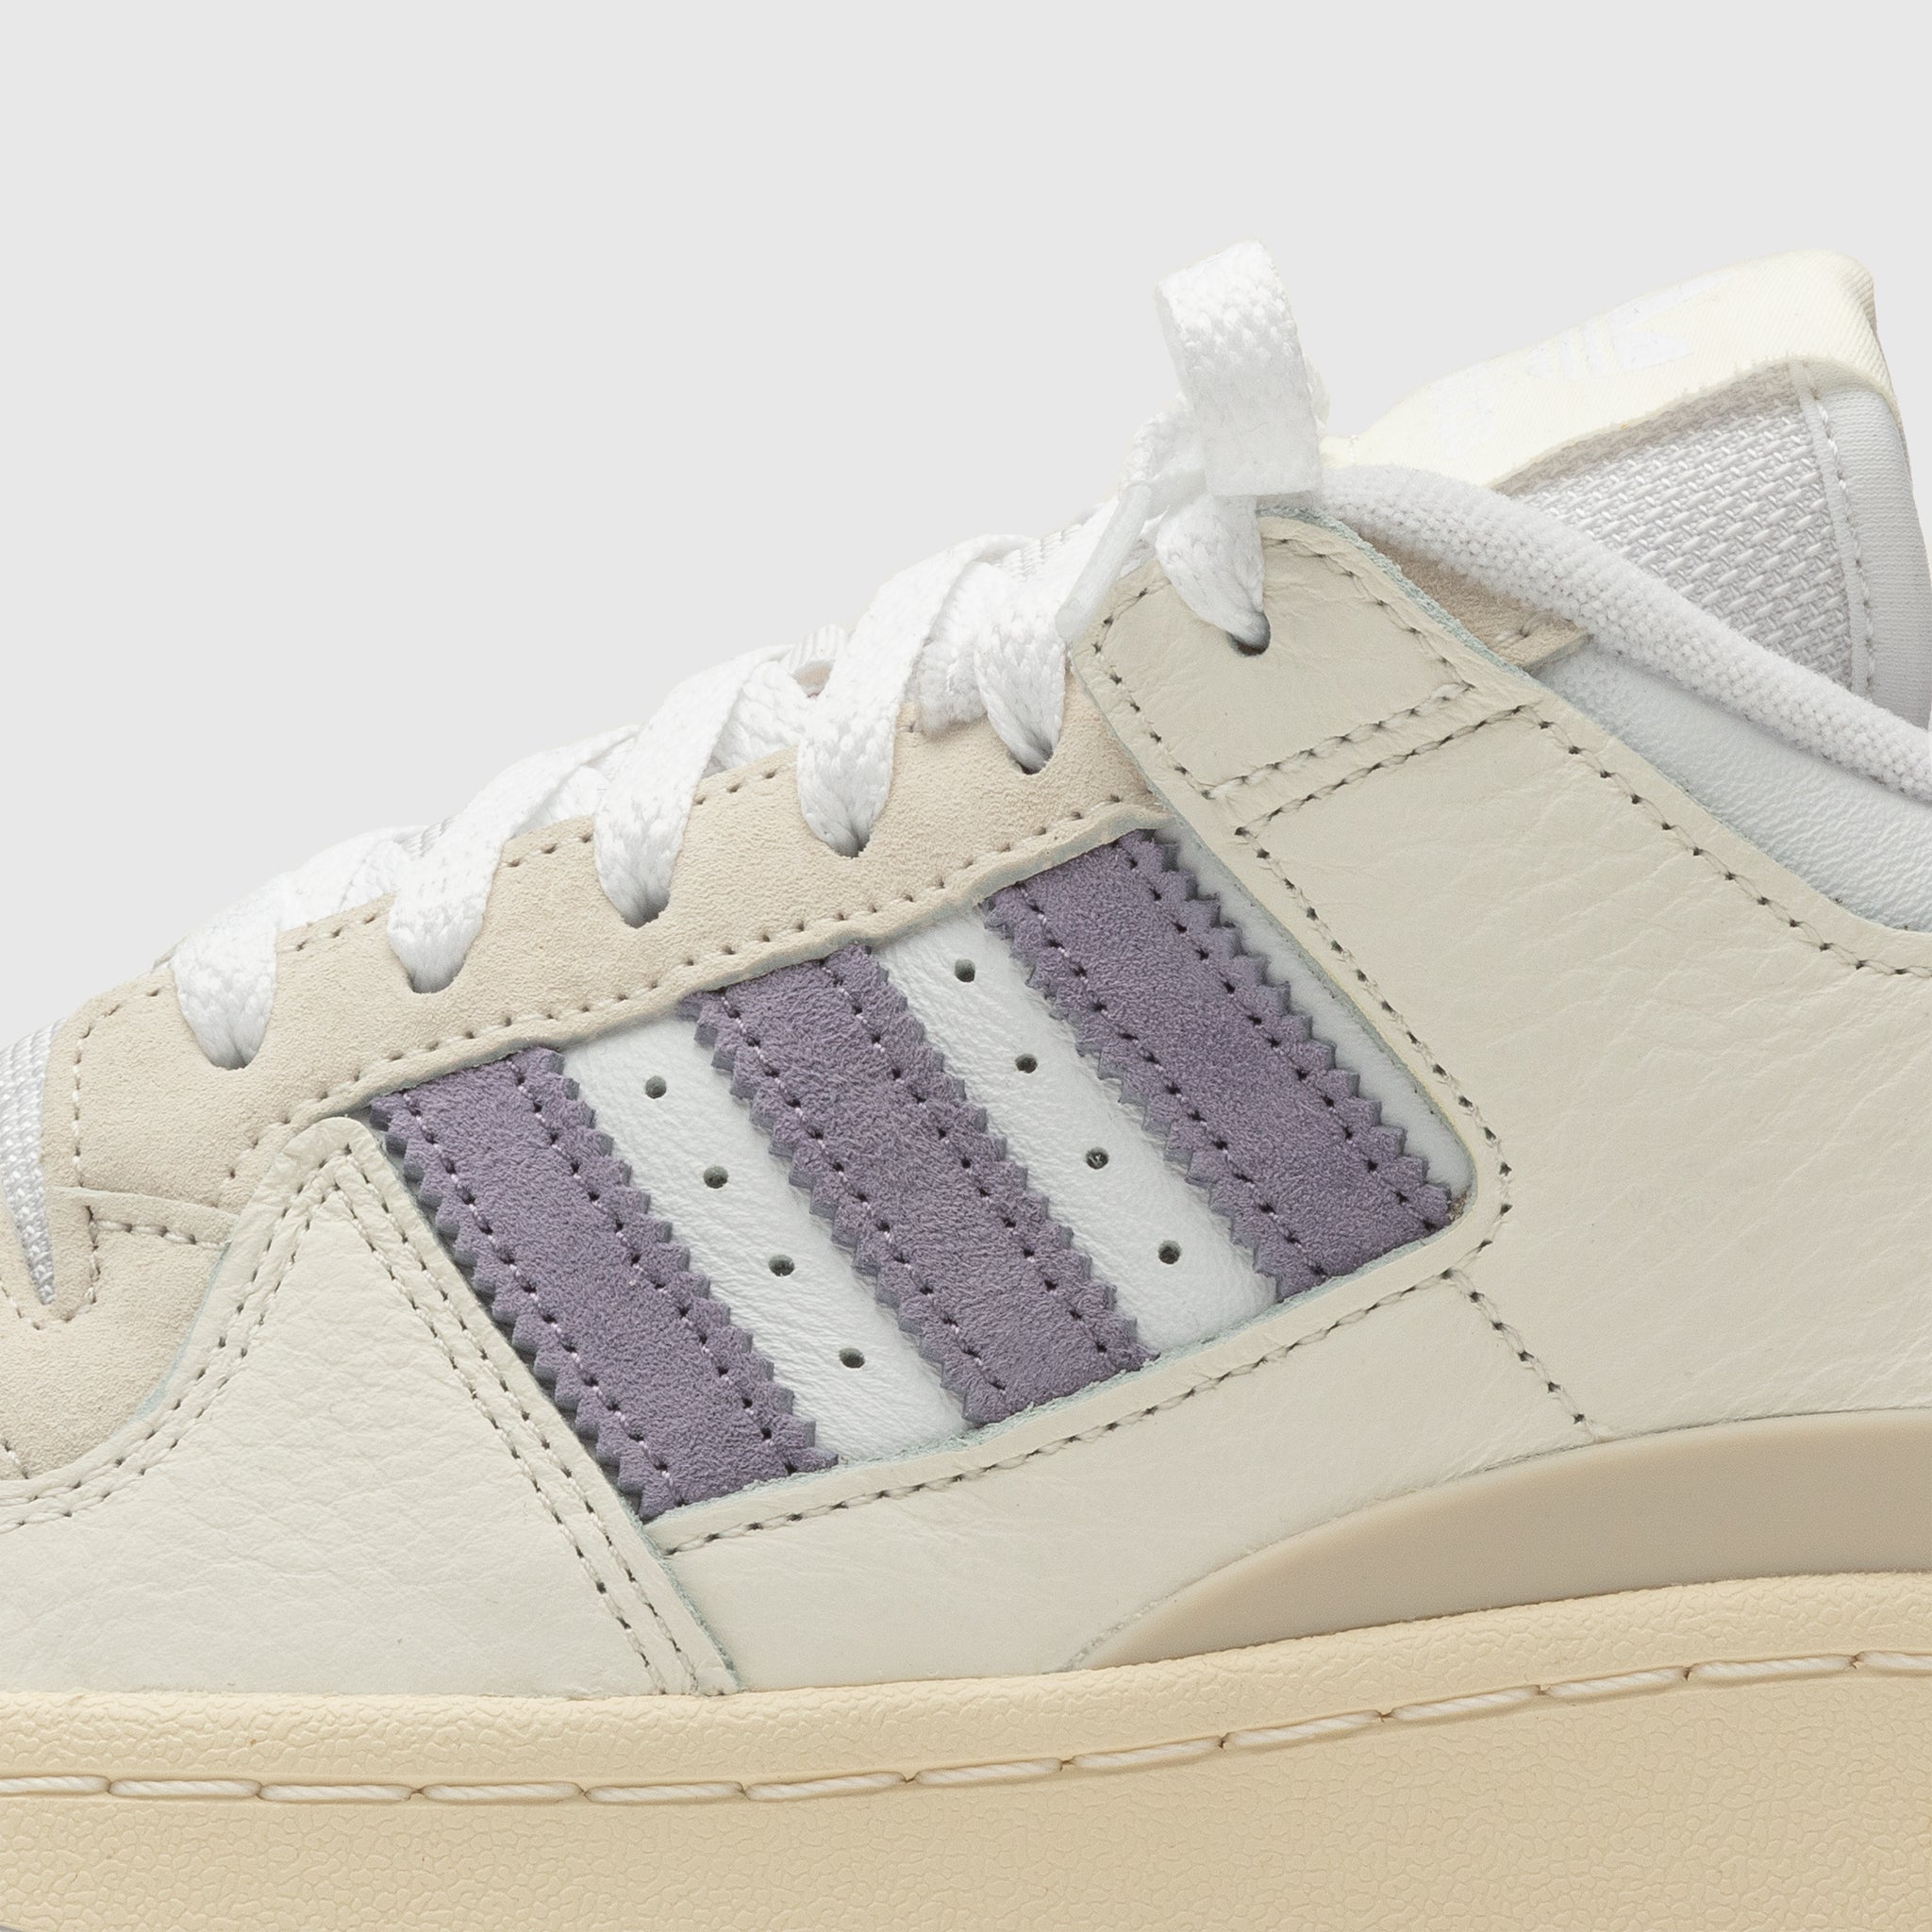 PACKER X ADIDAS FORUM 84 LOW "LILAC"